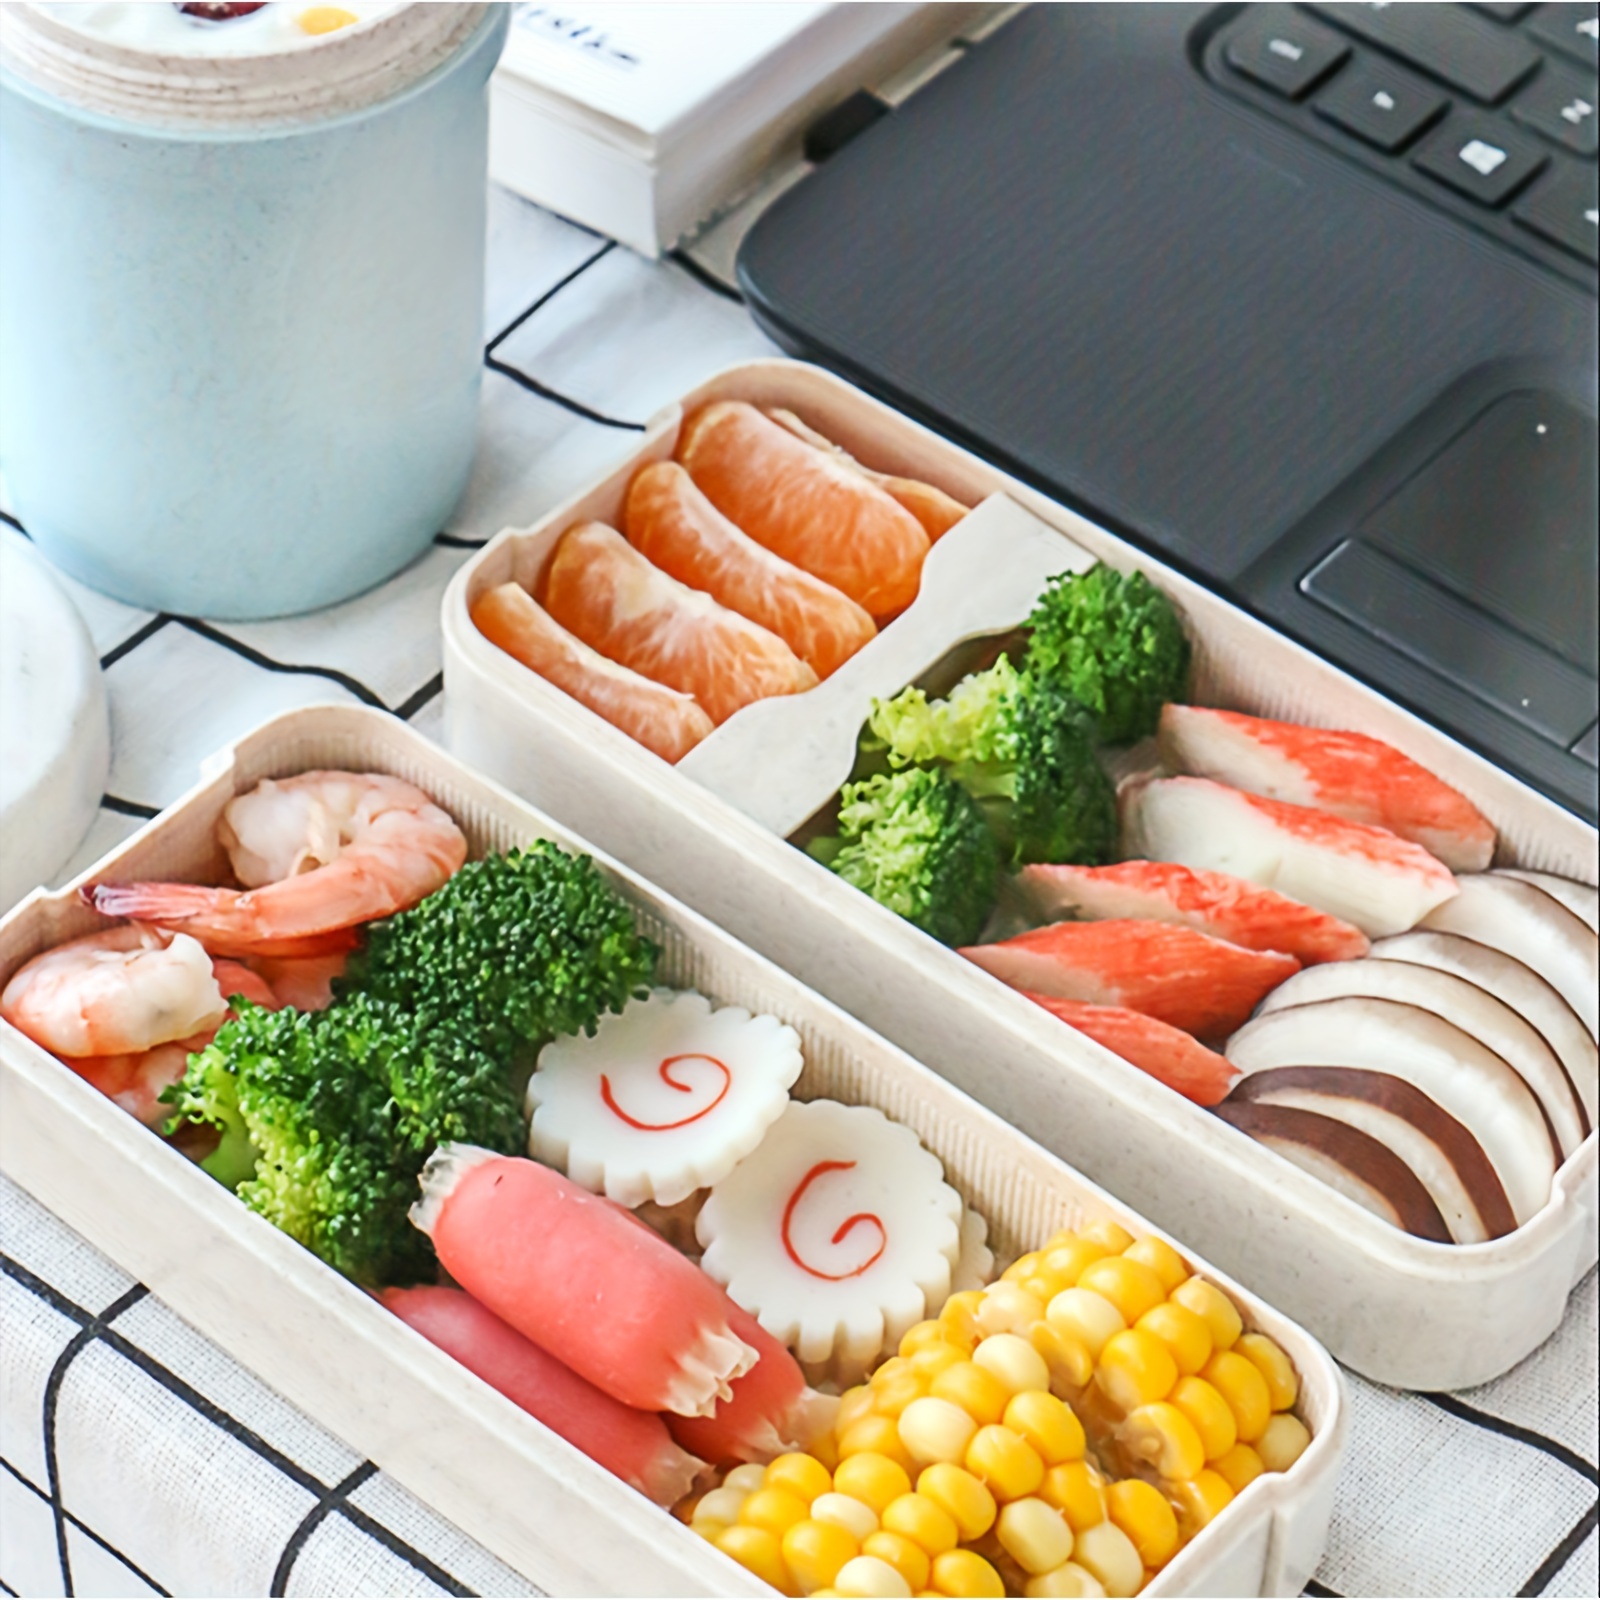 Bento Box For Kids Adults Lunch Box With 3 Compartment, Wheat